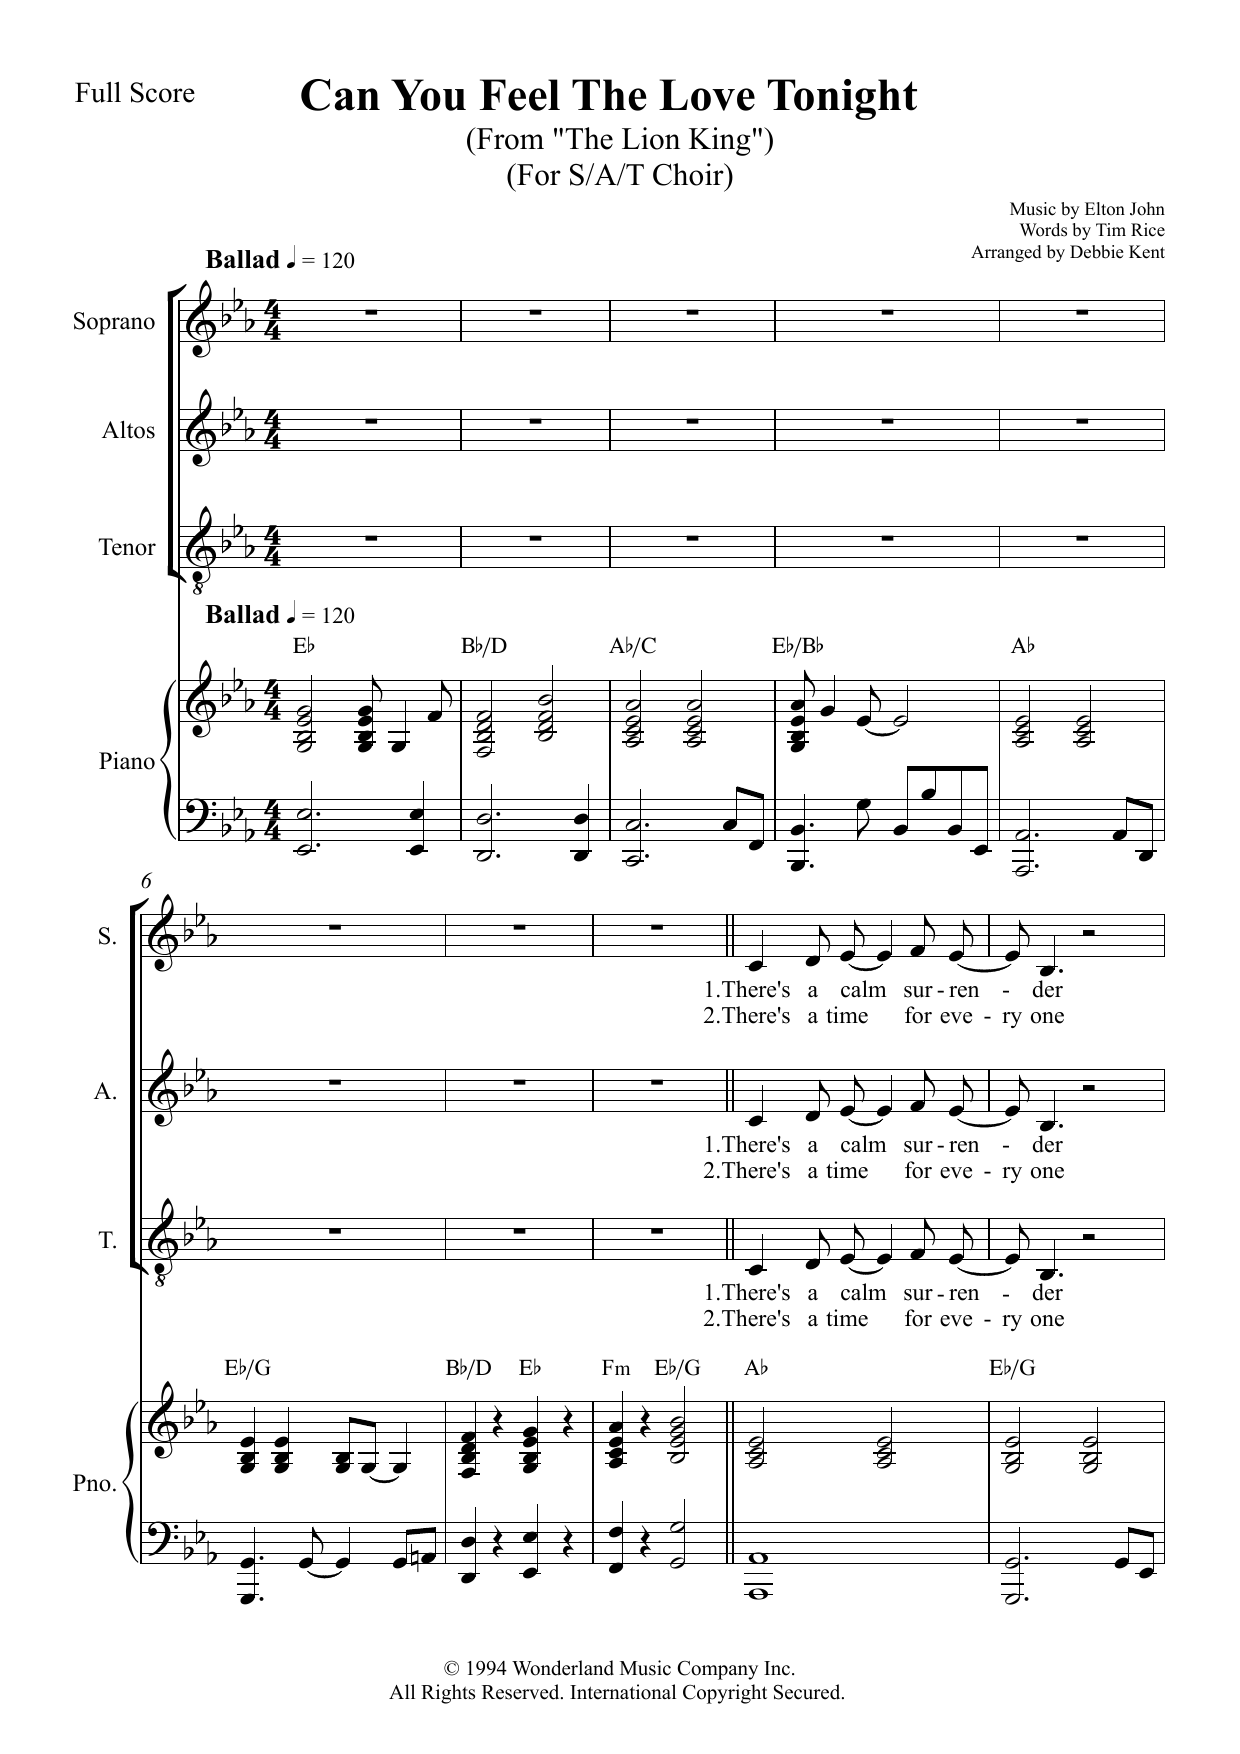 Elton John Can You Feel The Love Tonight (from The Lion King) (arr. Debbie Kent) sheet music notes and chords. Download Printable PDF.